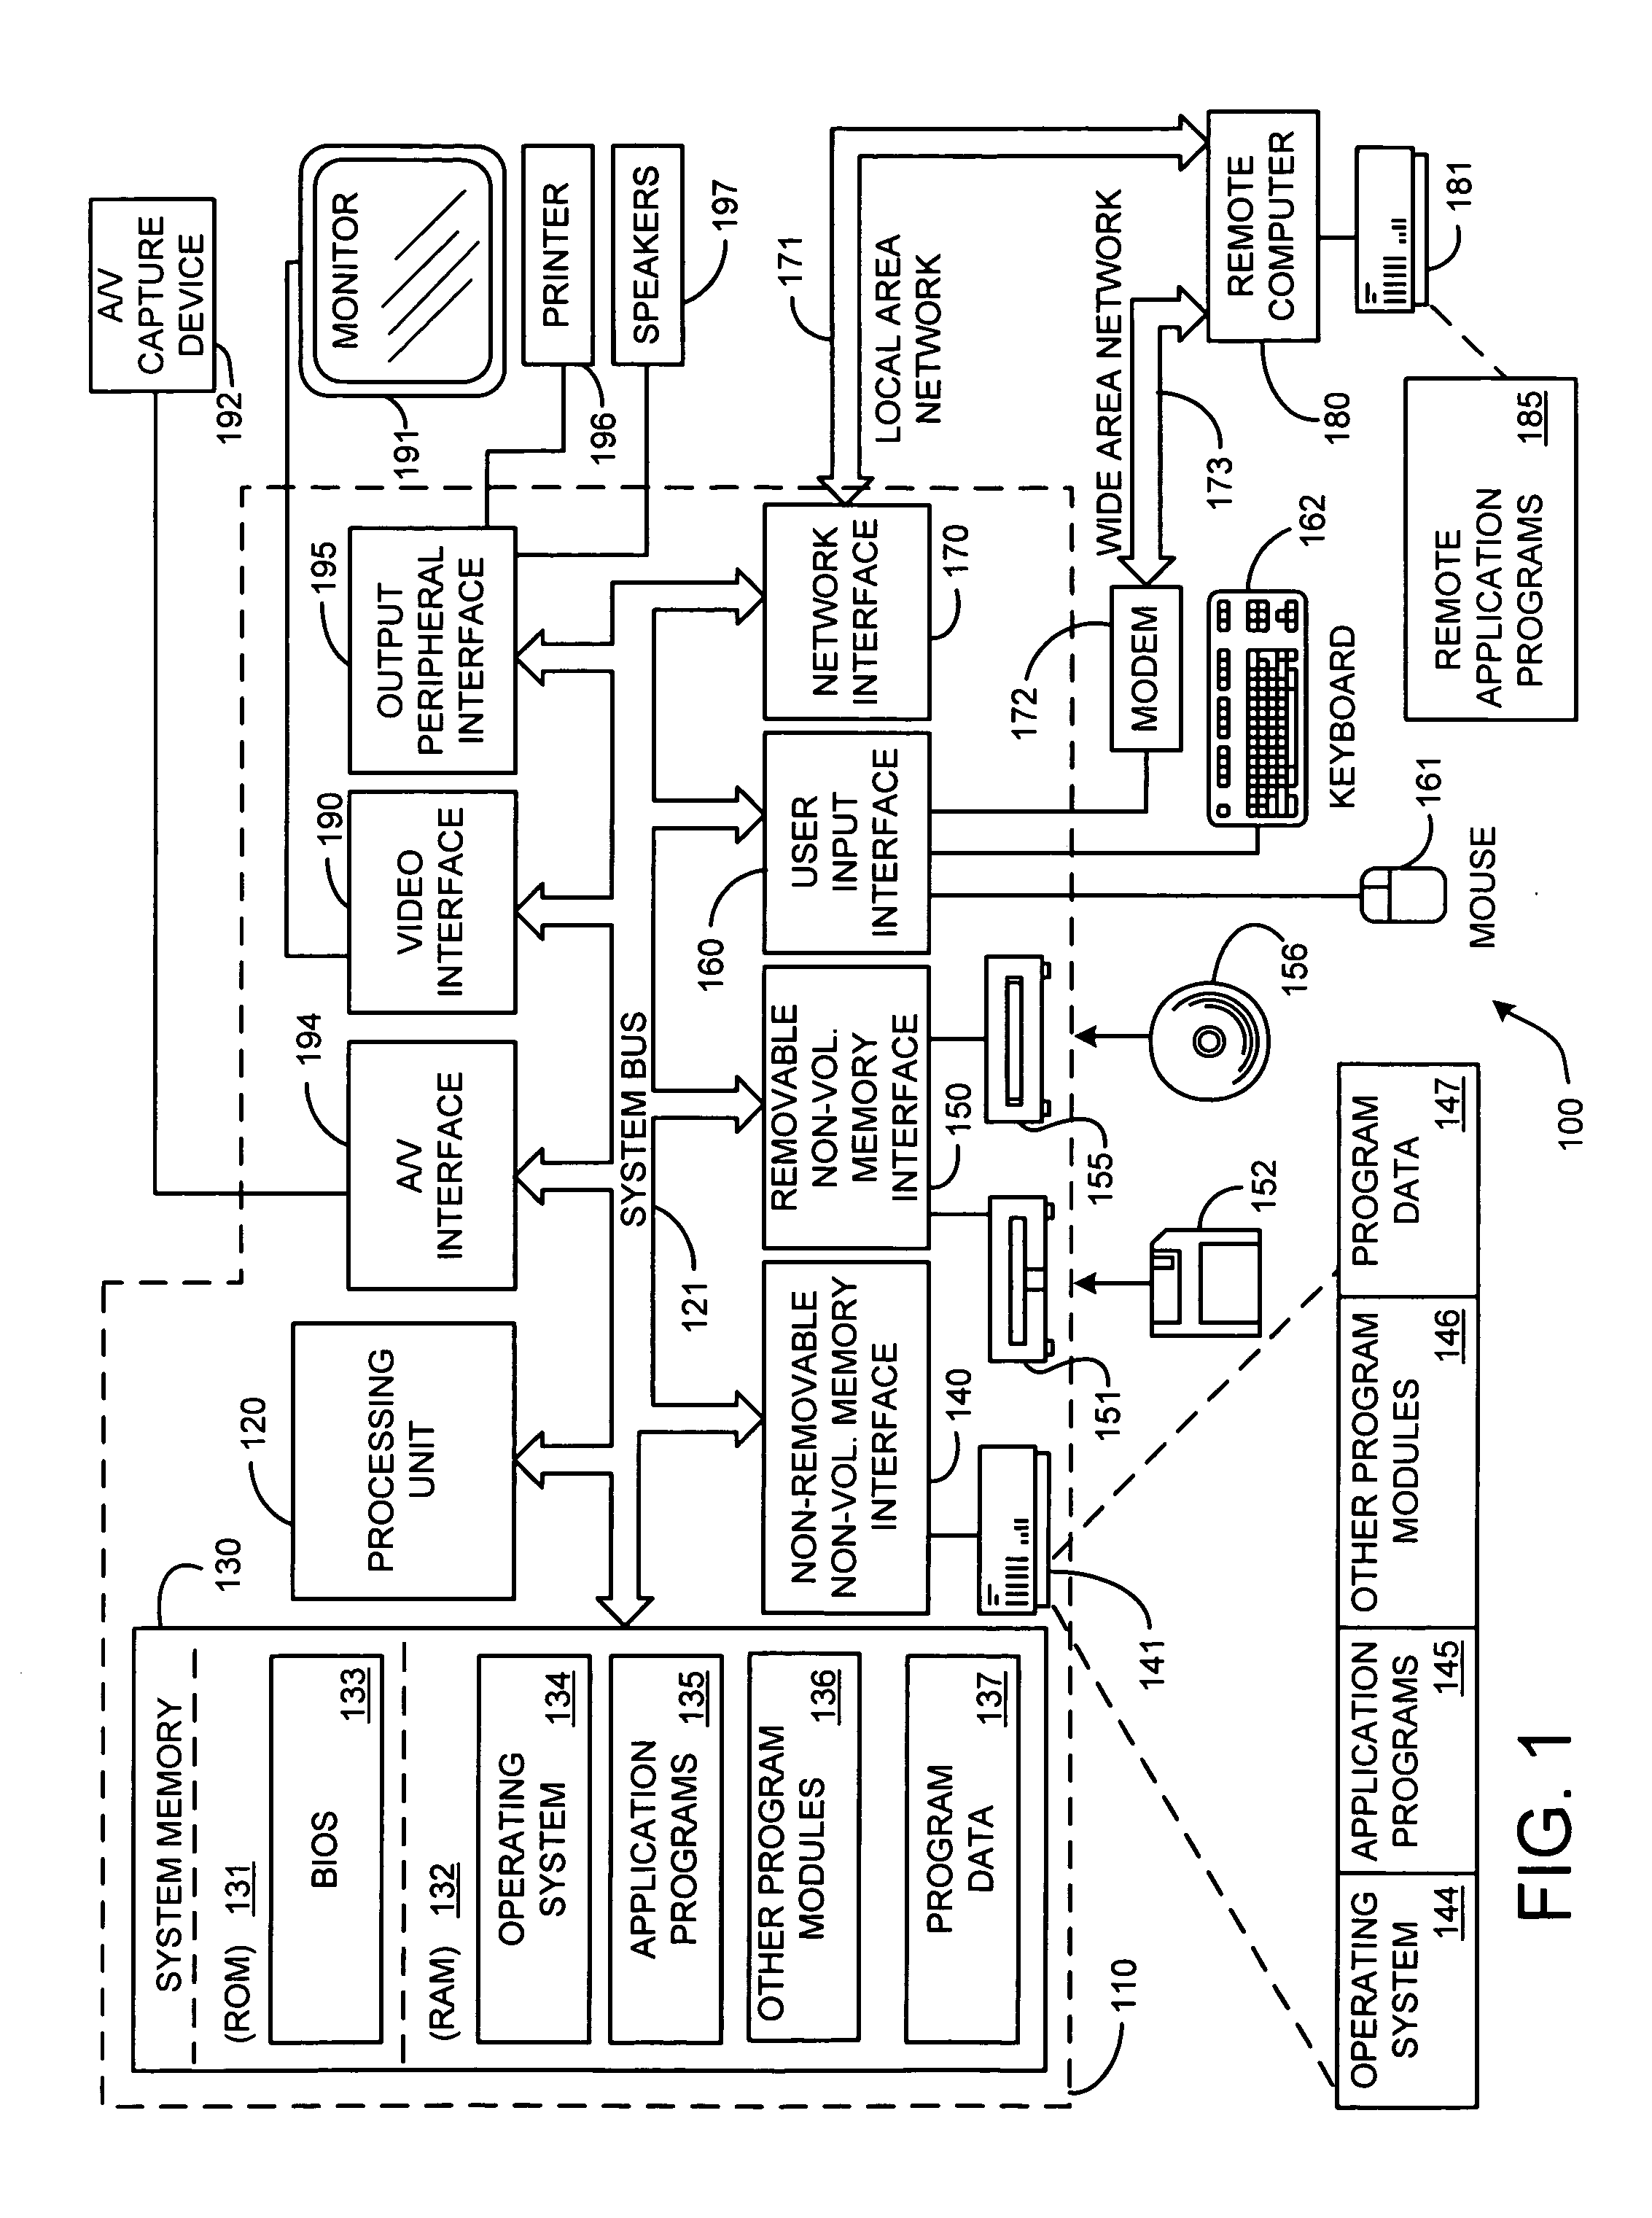 System and process for adding high frame-rate current speaker data to a low frame-rate video using delta frames